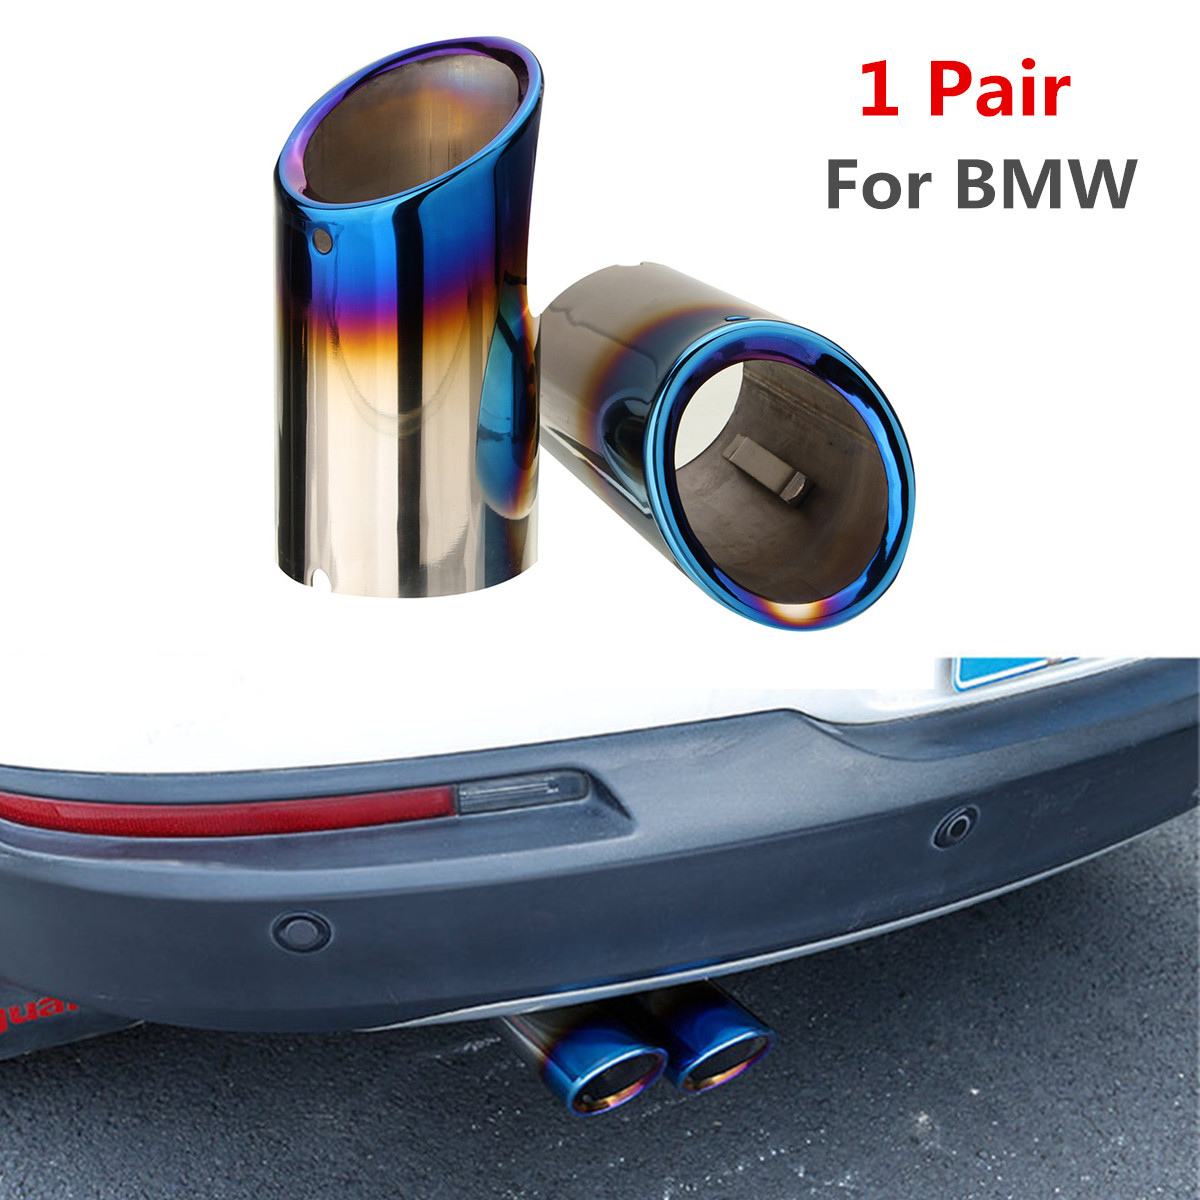 2X Car Tail Exhaust Tip Pipes Grilled Blue For BMW E90 E92 325i 2006